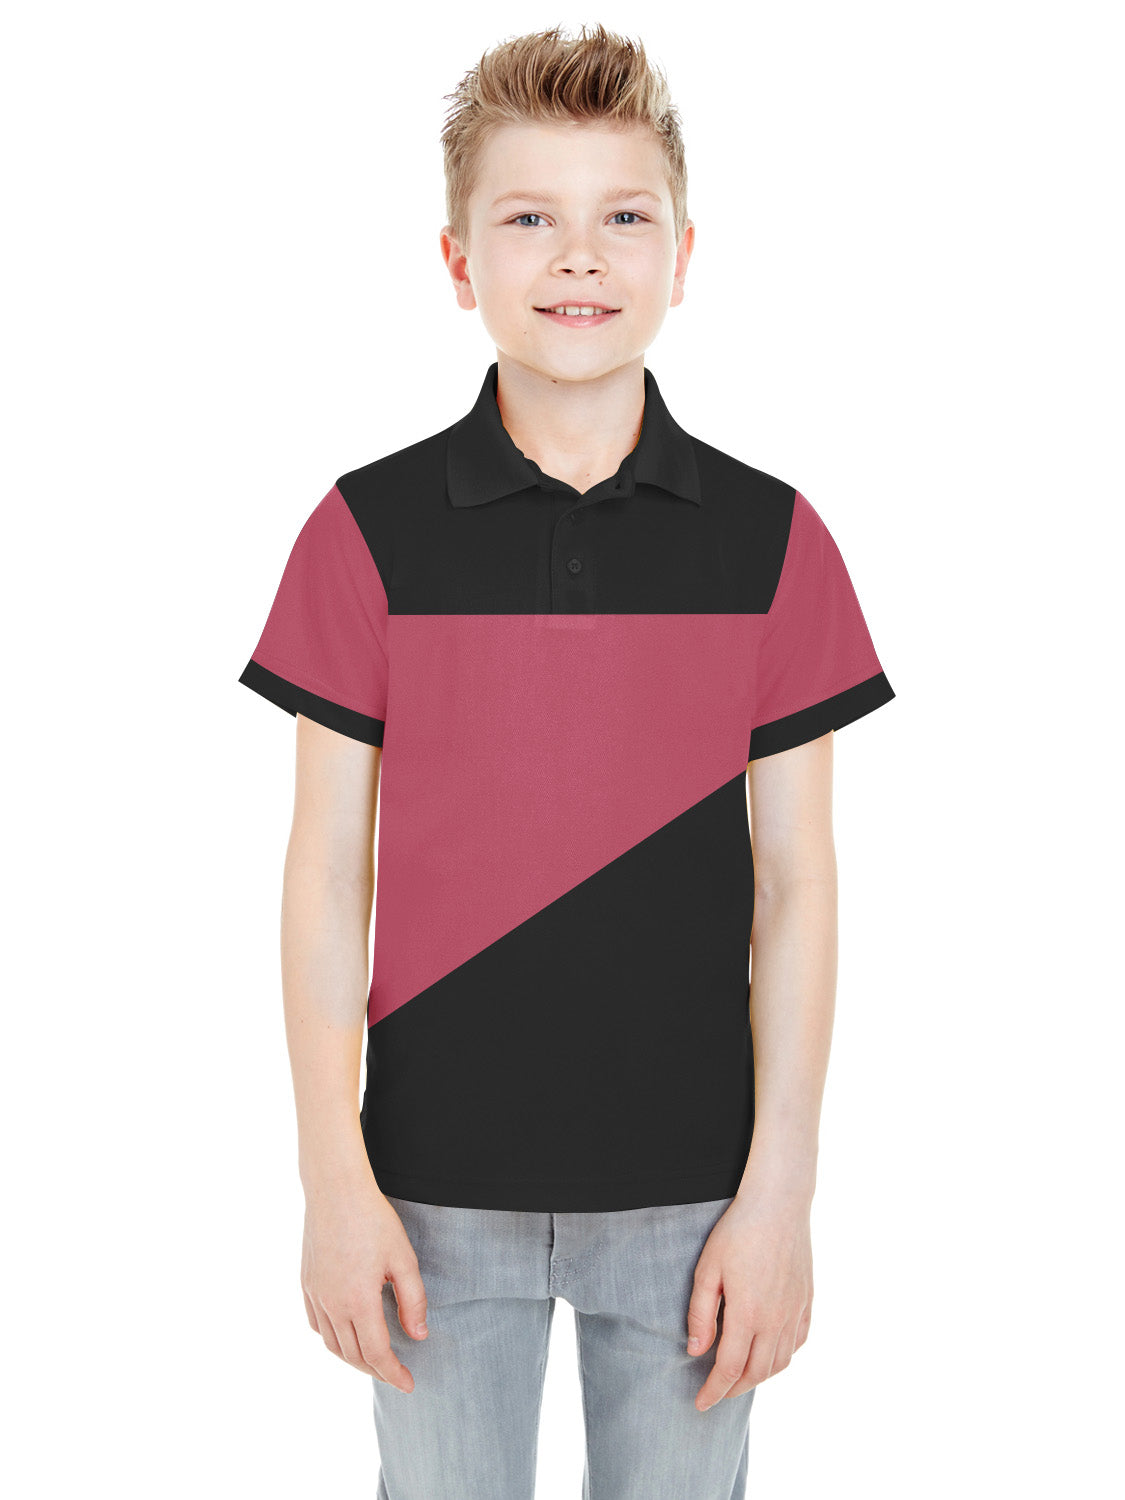 NXT Summer P.Q Polo Shirt For Kids-Black with Pink Panel-SP1689